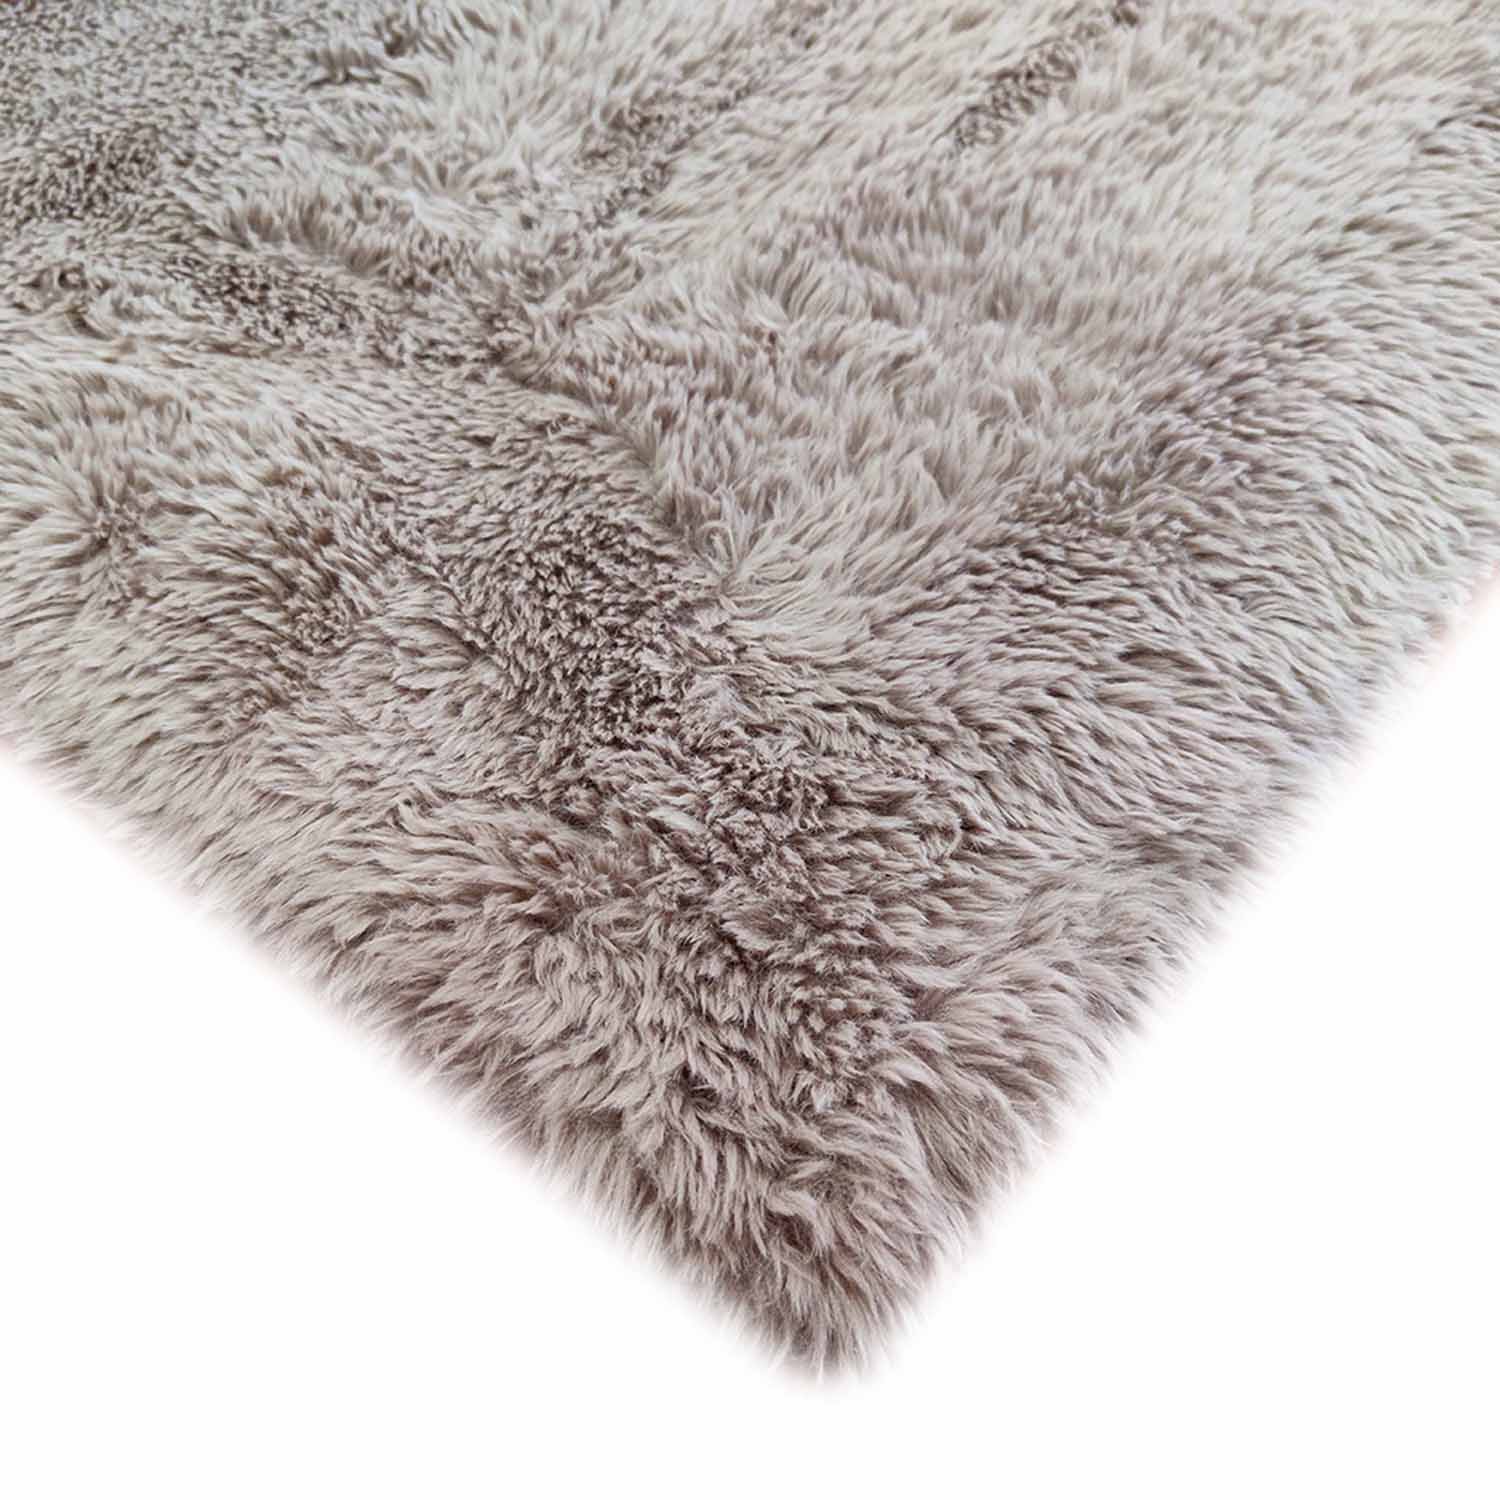 The Home Living Room Sheepskin Rug 120cm x 160cm - Taupe 2 Shaws Department Stores